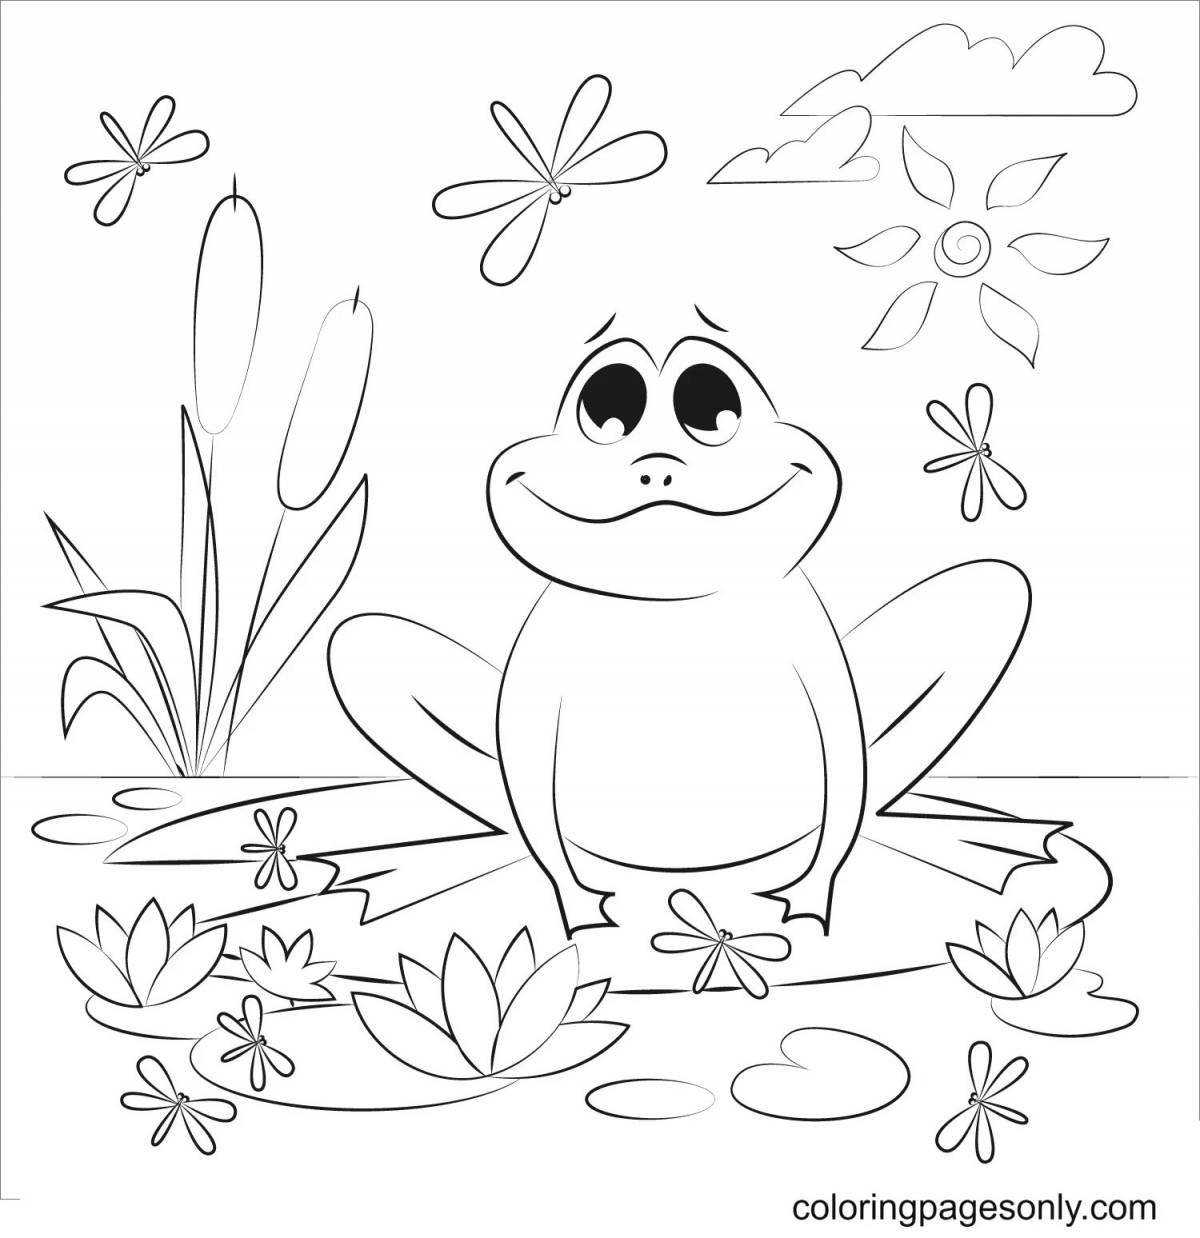 Exciting frog coloring book for 4-5 year olds